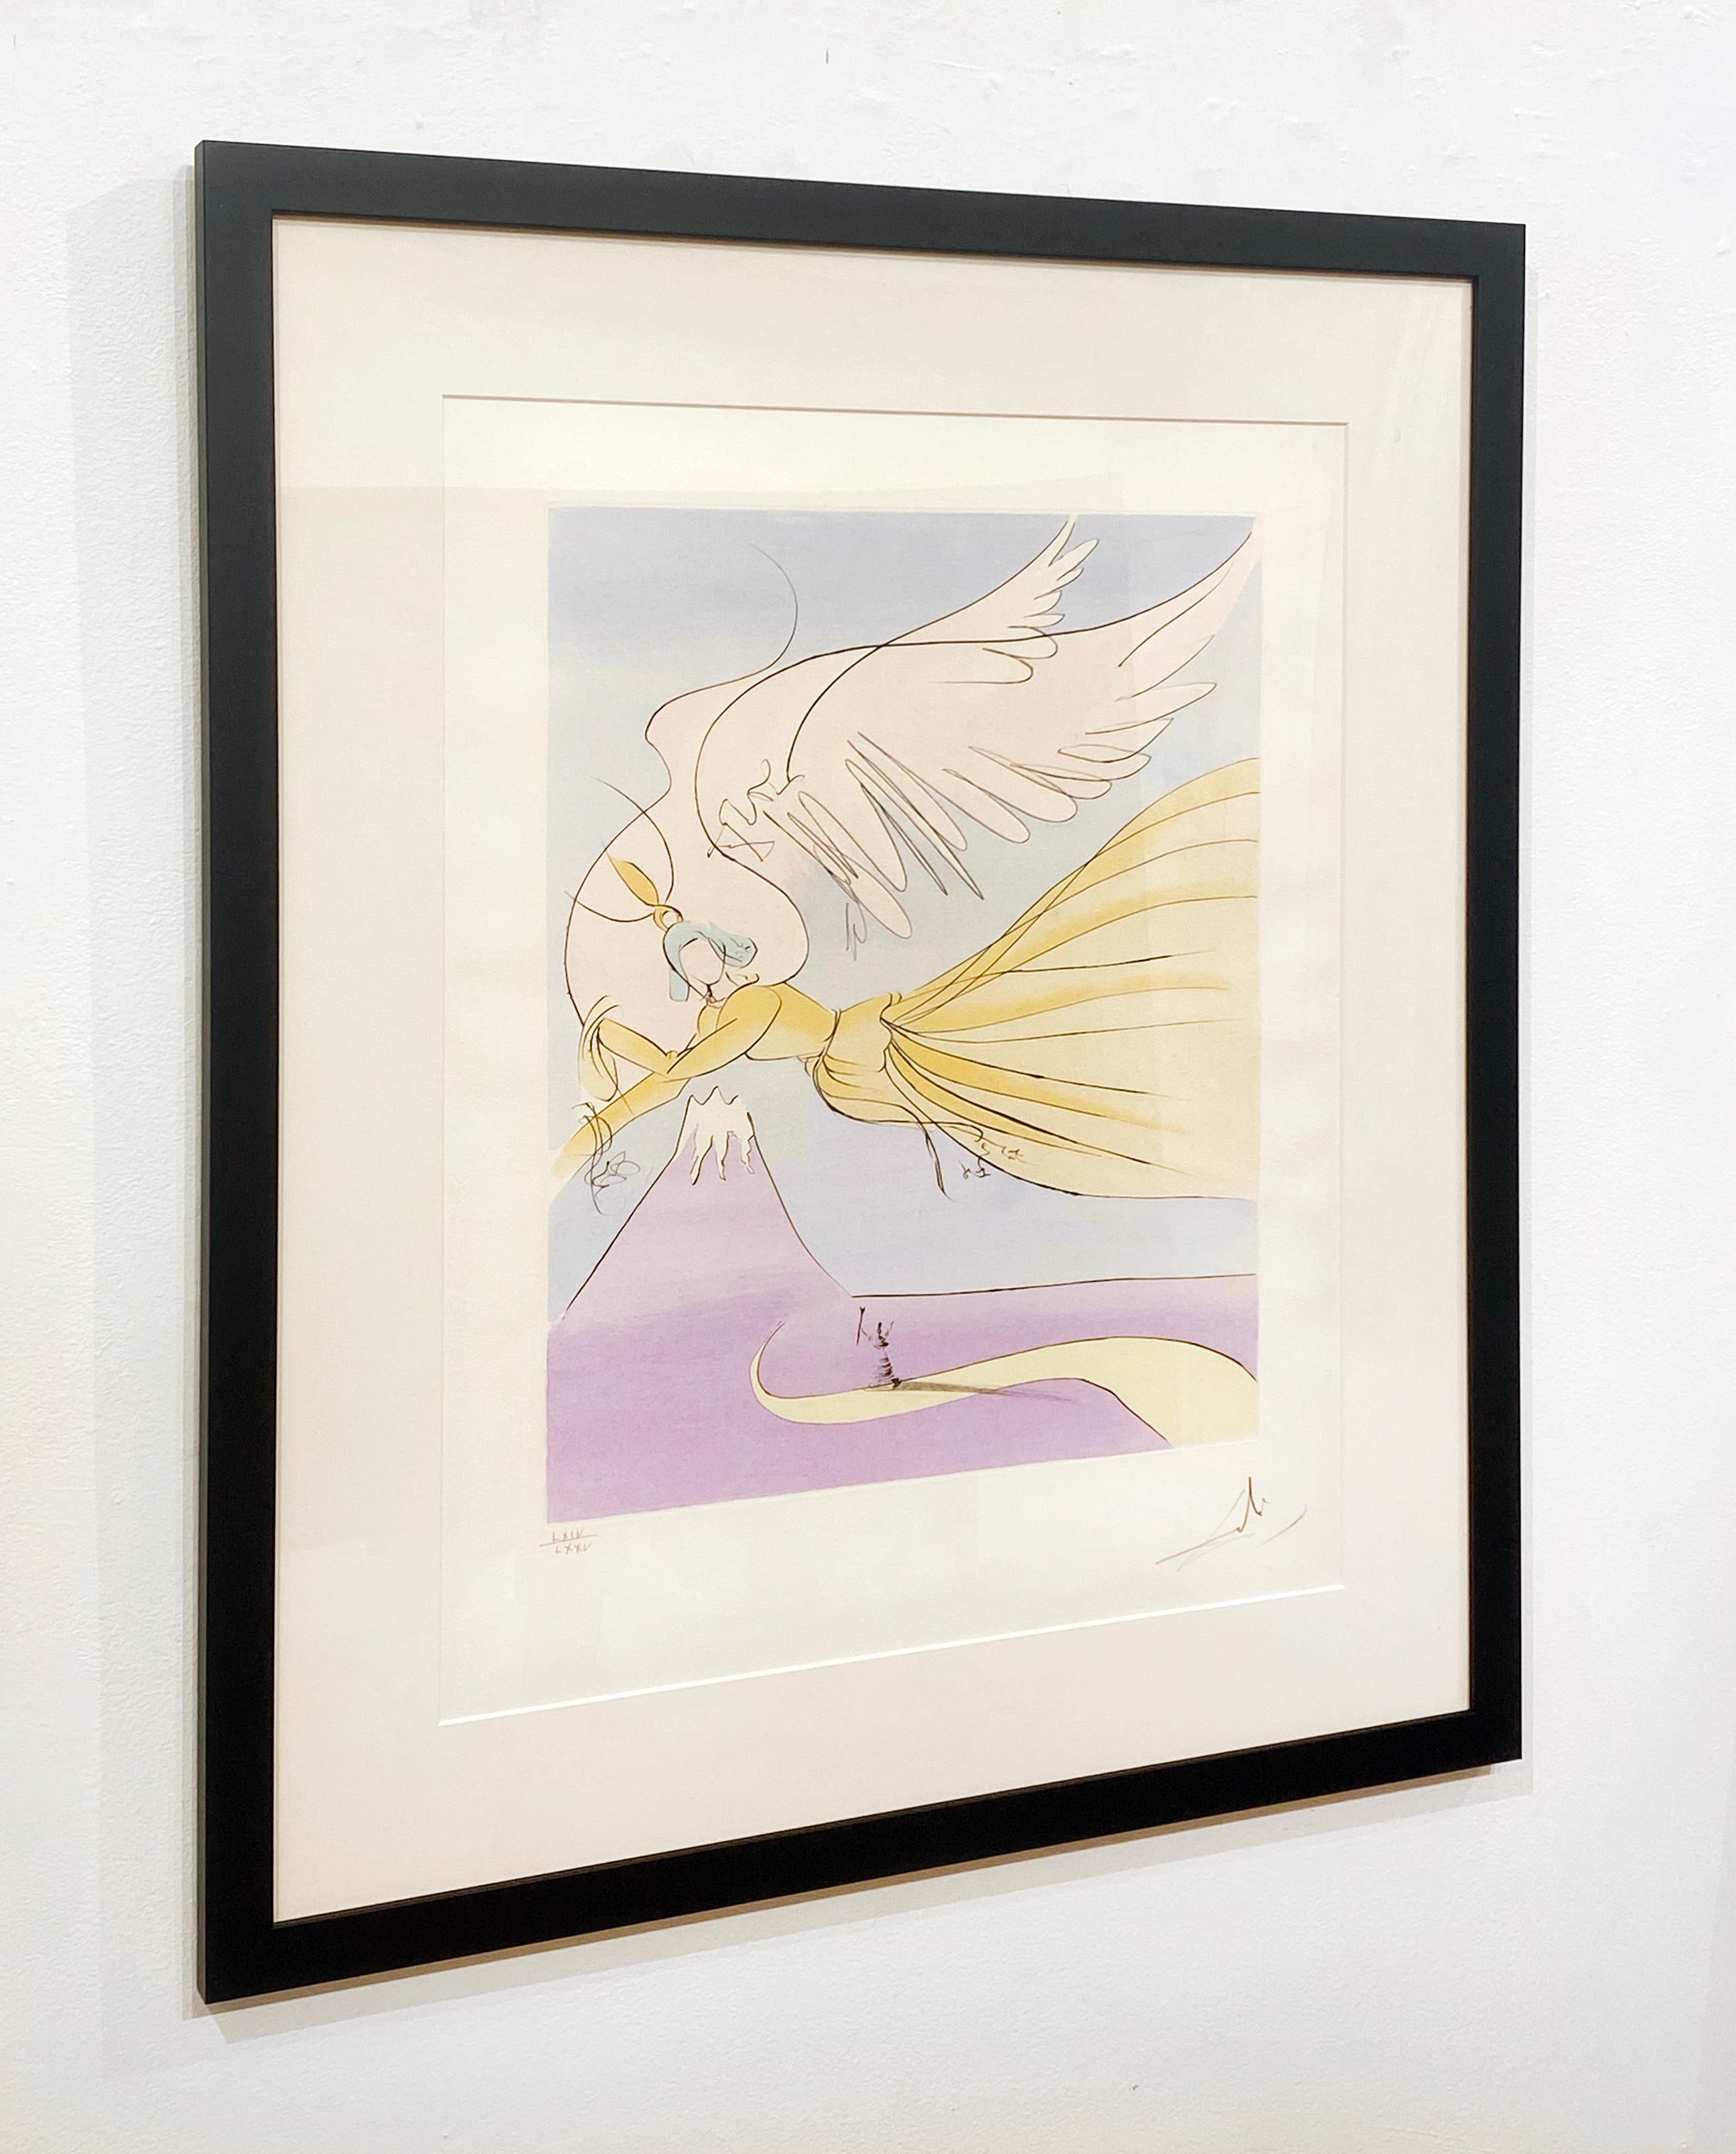 Artist:  Dali, Salvador
Title:  The Robe of Feathers
Series:  Japanese Fairy Tales
Medium:  drypoint with stenciled color
Year: 1974
Framed Dimensions:  33.5